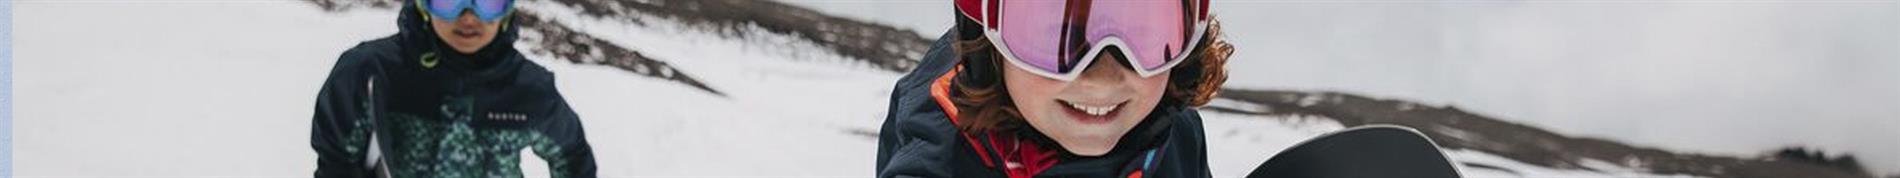 Quiksilver Kids Ski & Snowboard Clothing (Ages 6-16) 